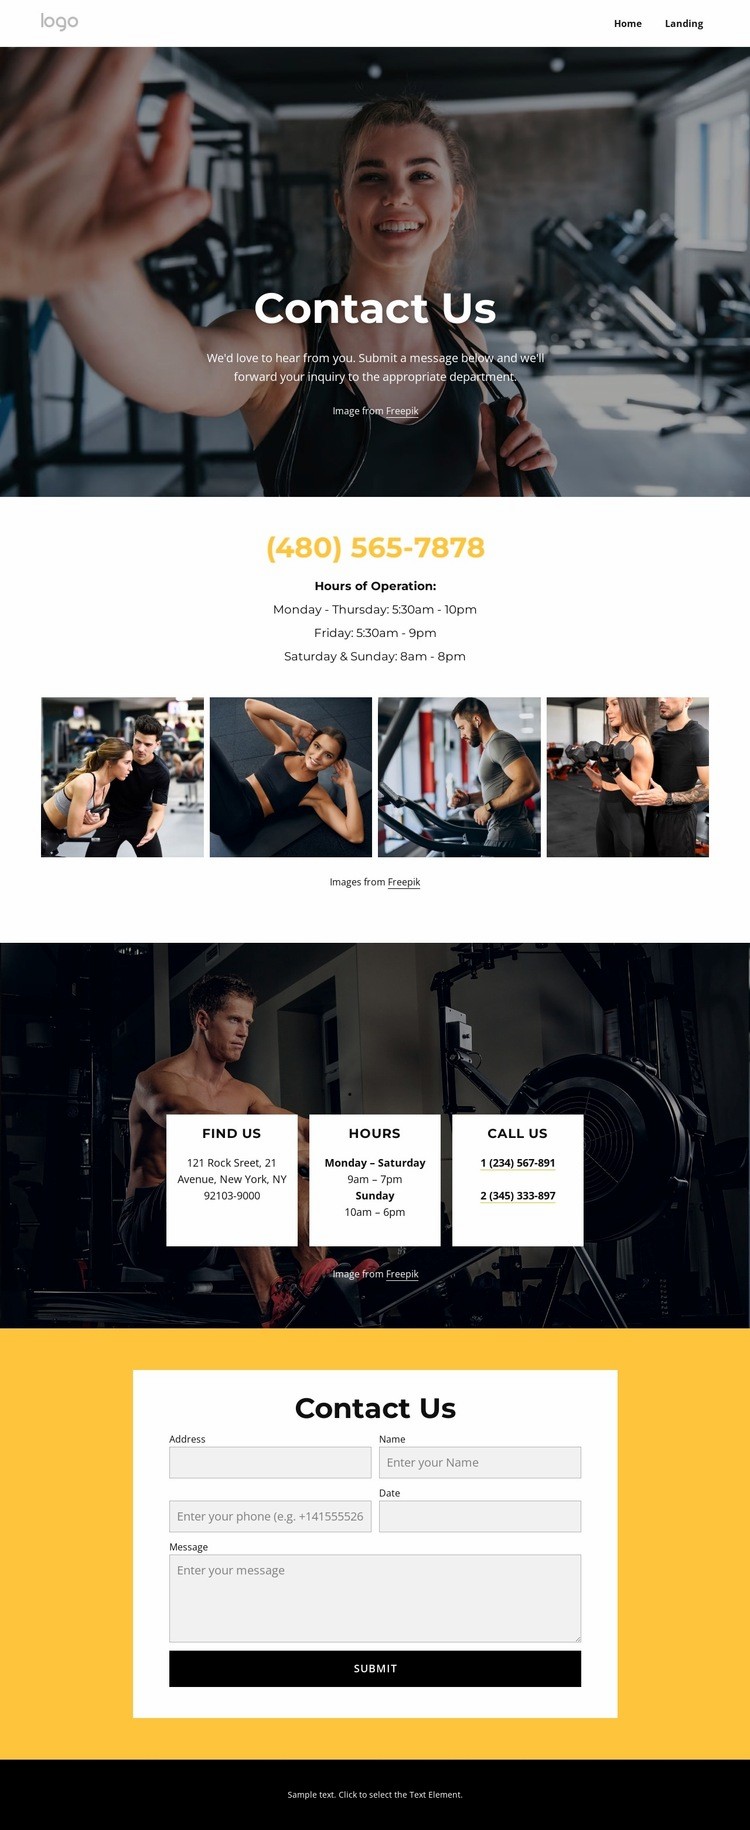 Personal training, group classes Elementor Template Alternative